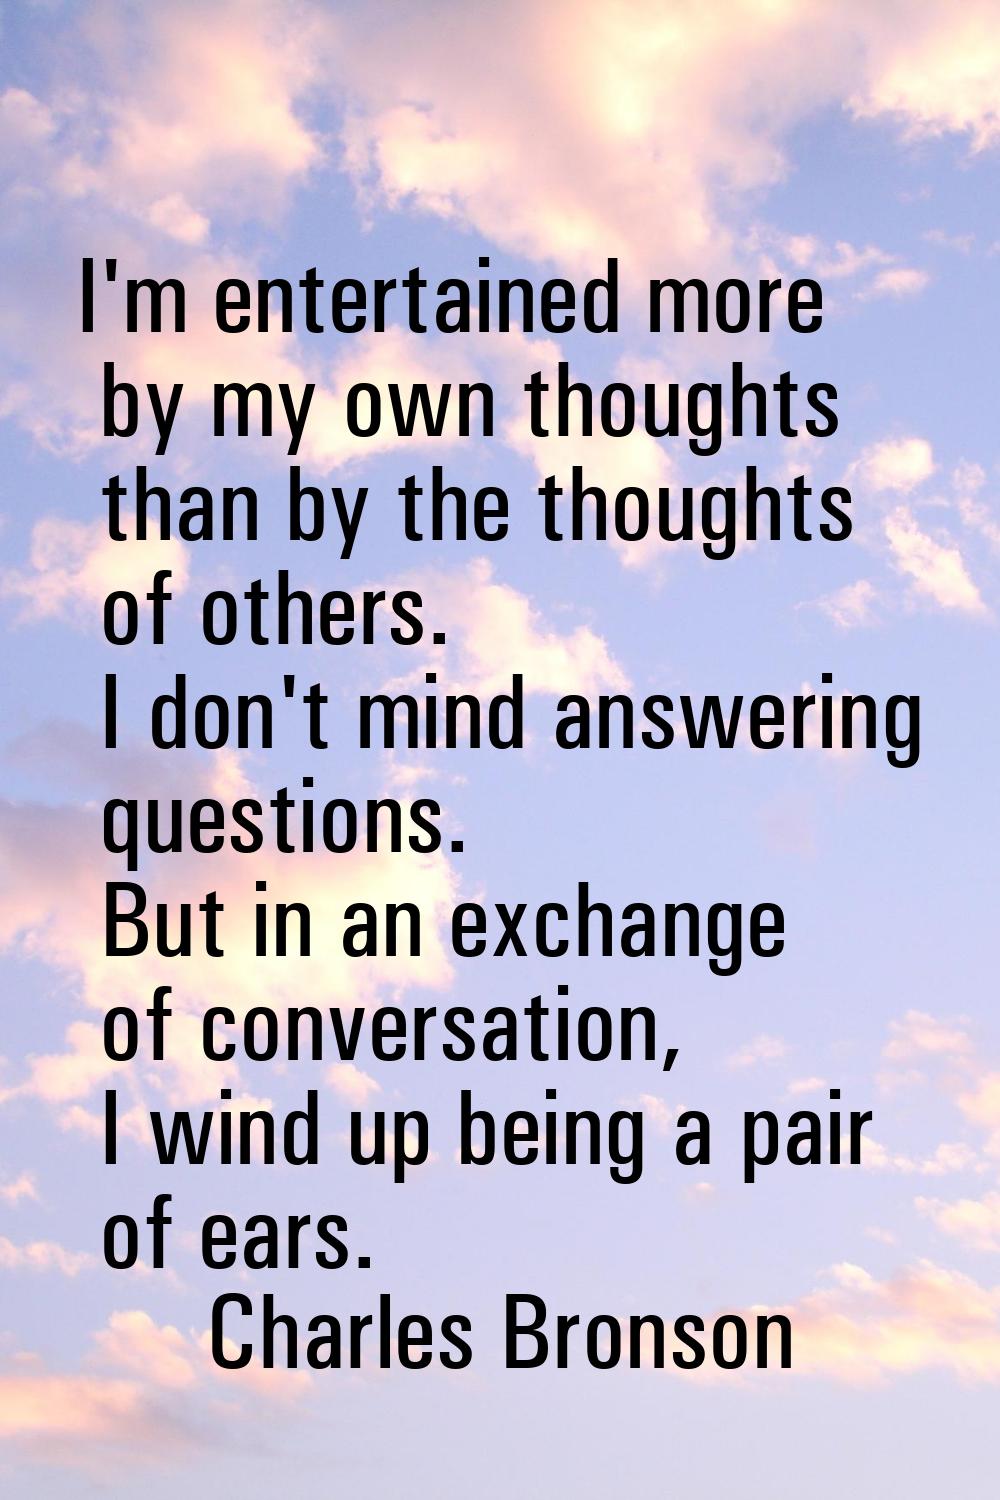 I'm entertained more by my own thoughts than by the thoughts of others. I don't mind answering ques